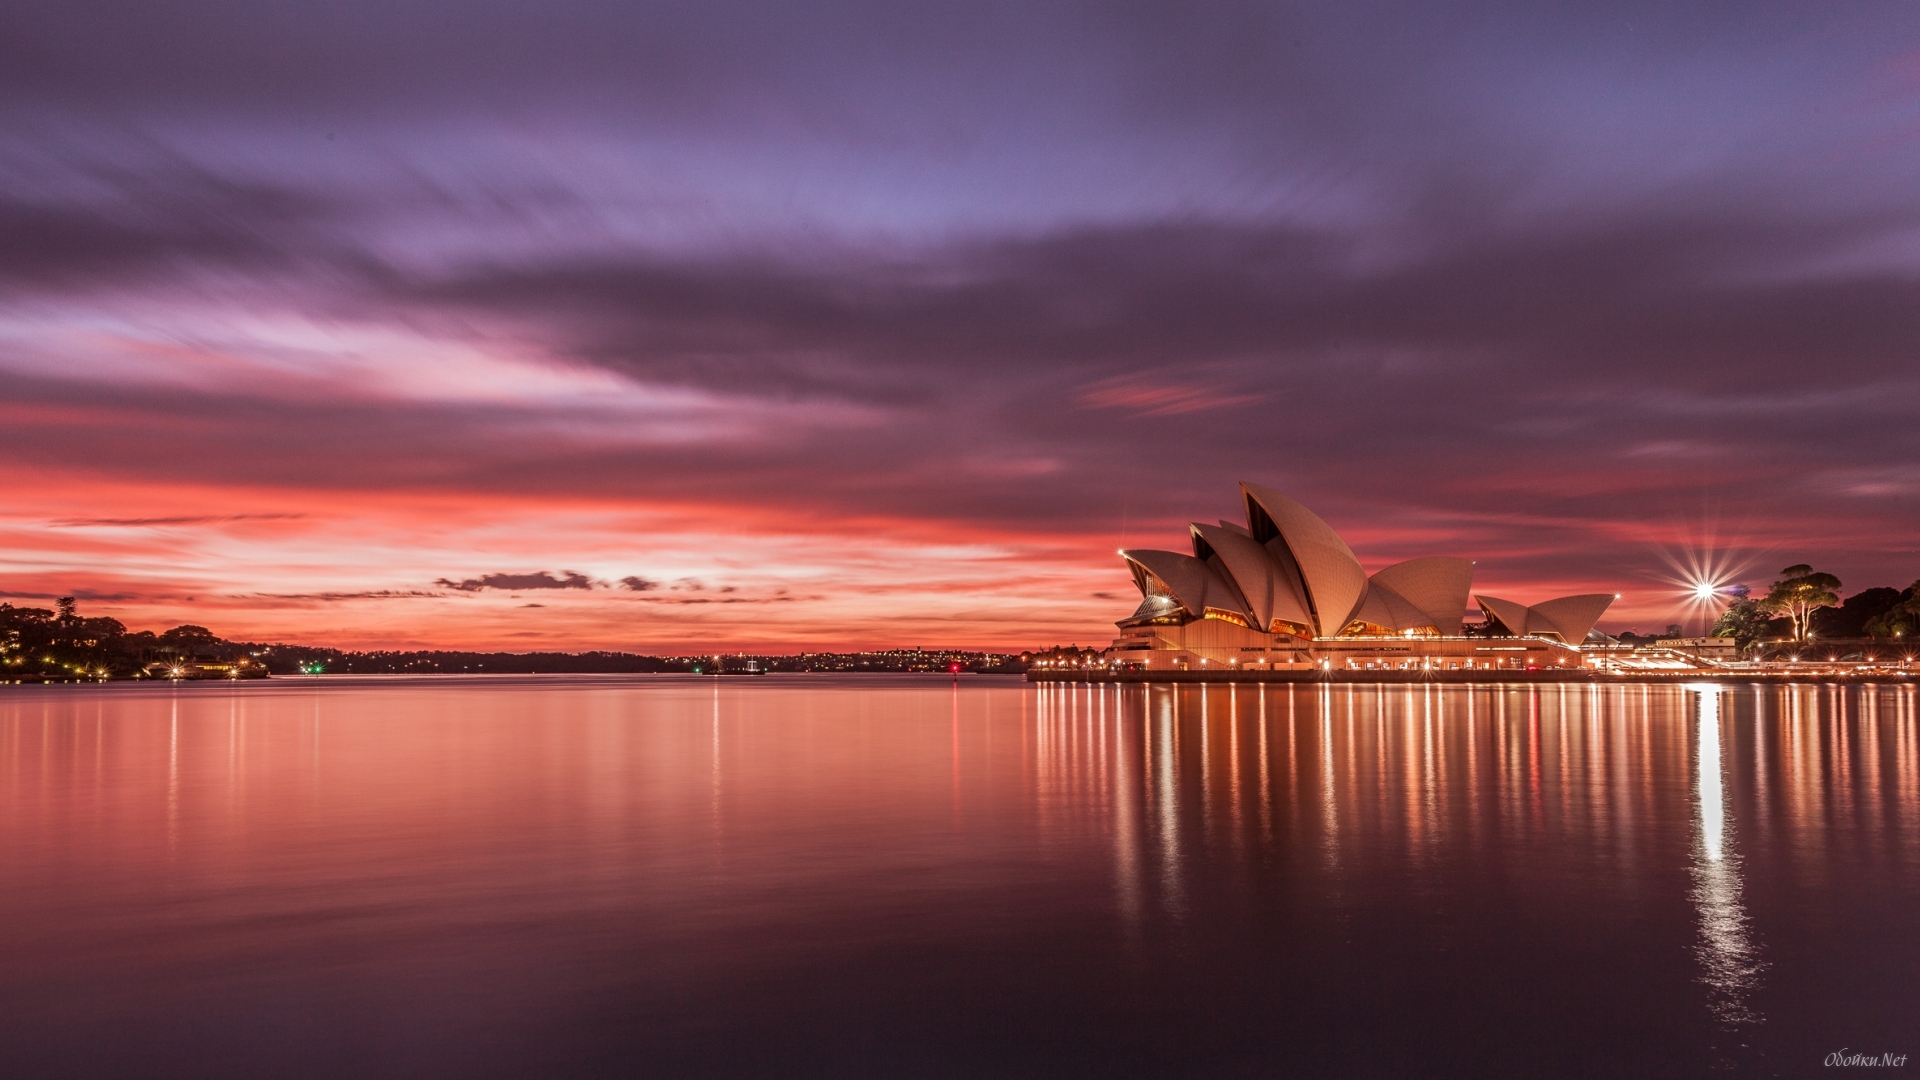 80+ Sydney HD Wallpapers and Backgrounds